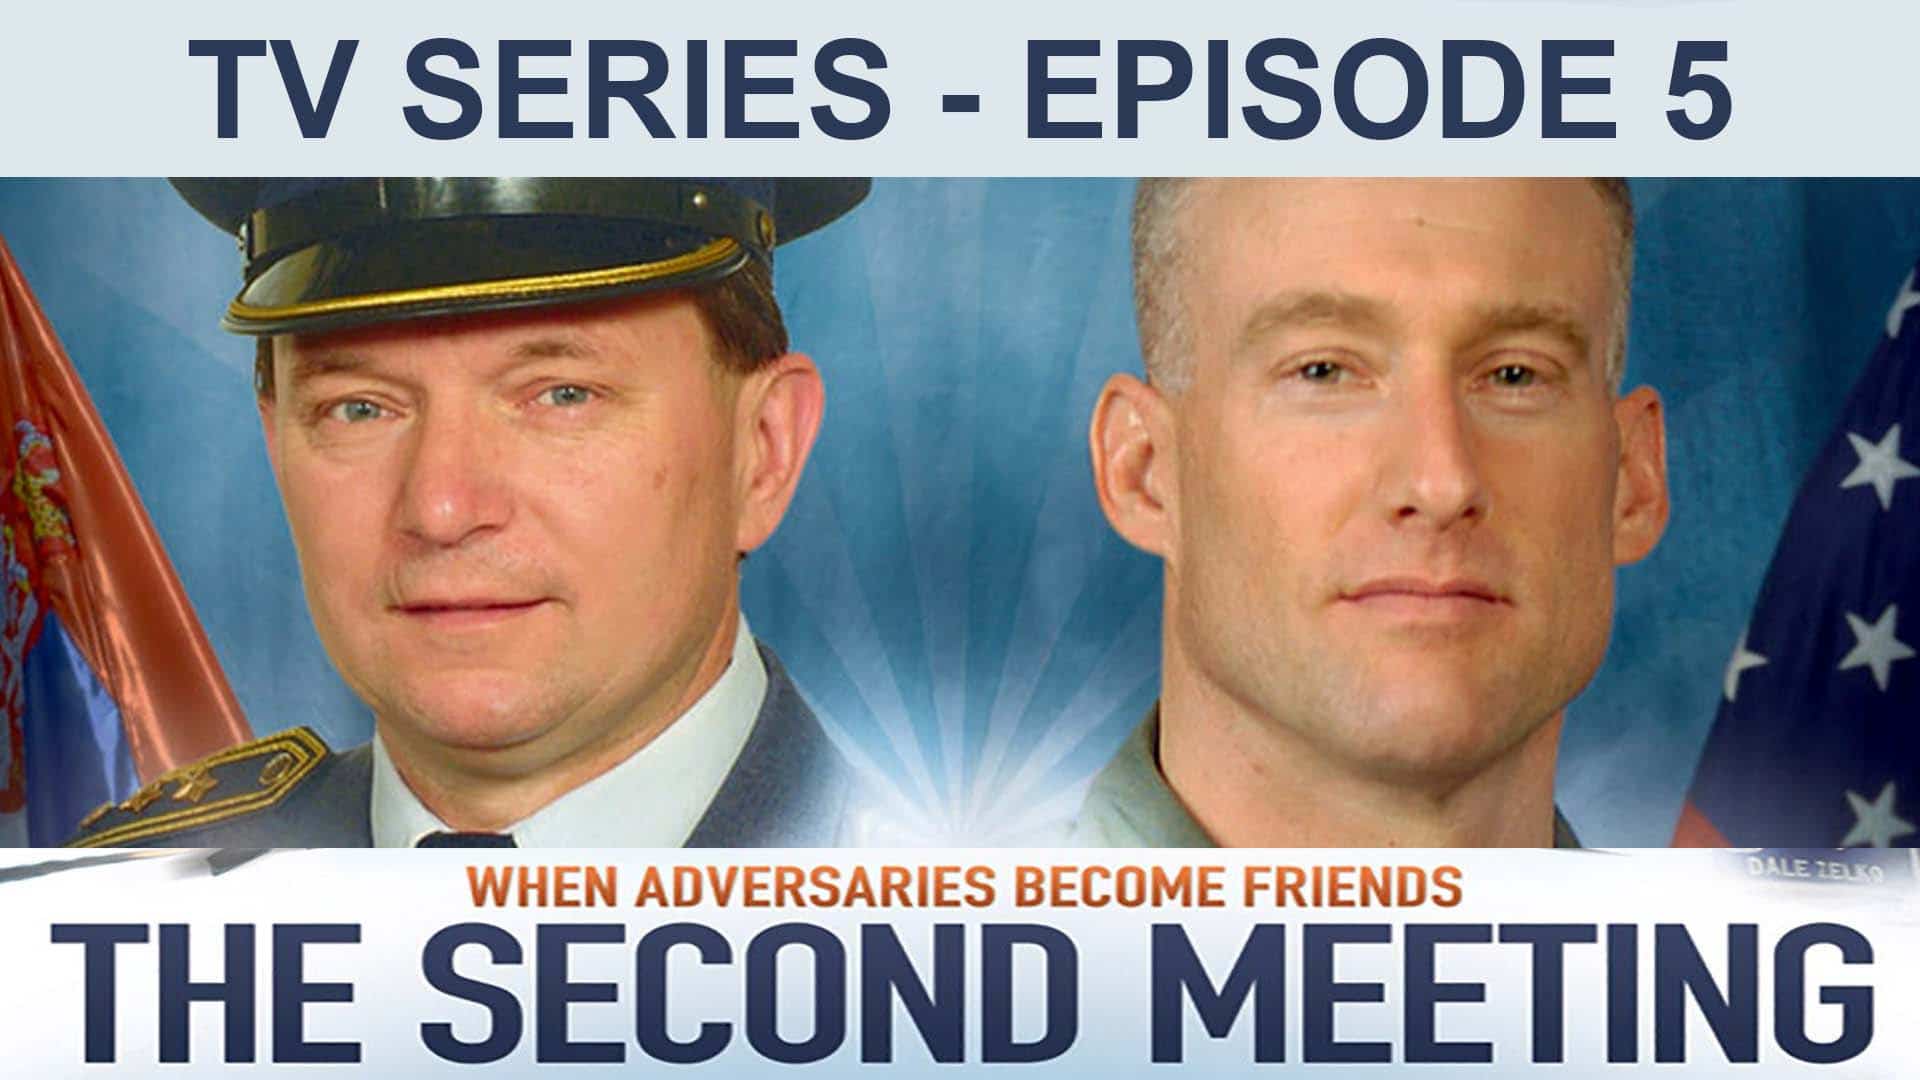 The Second Meeting TV Series Episode 5